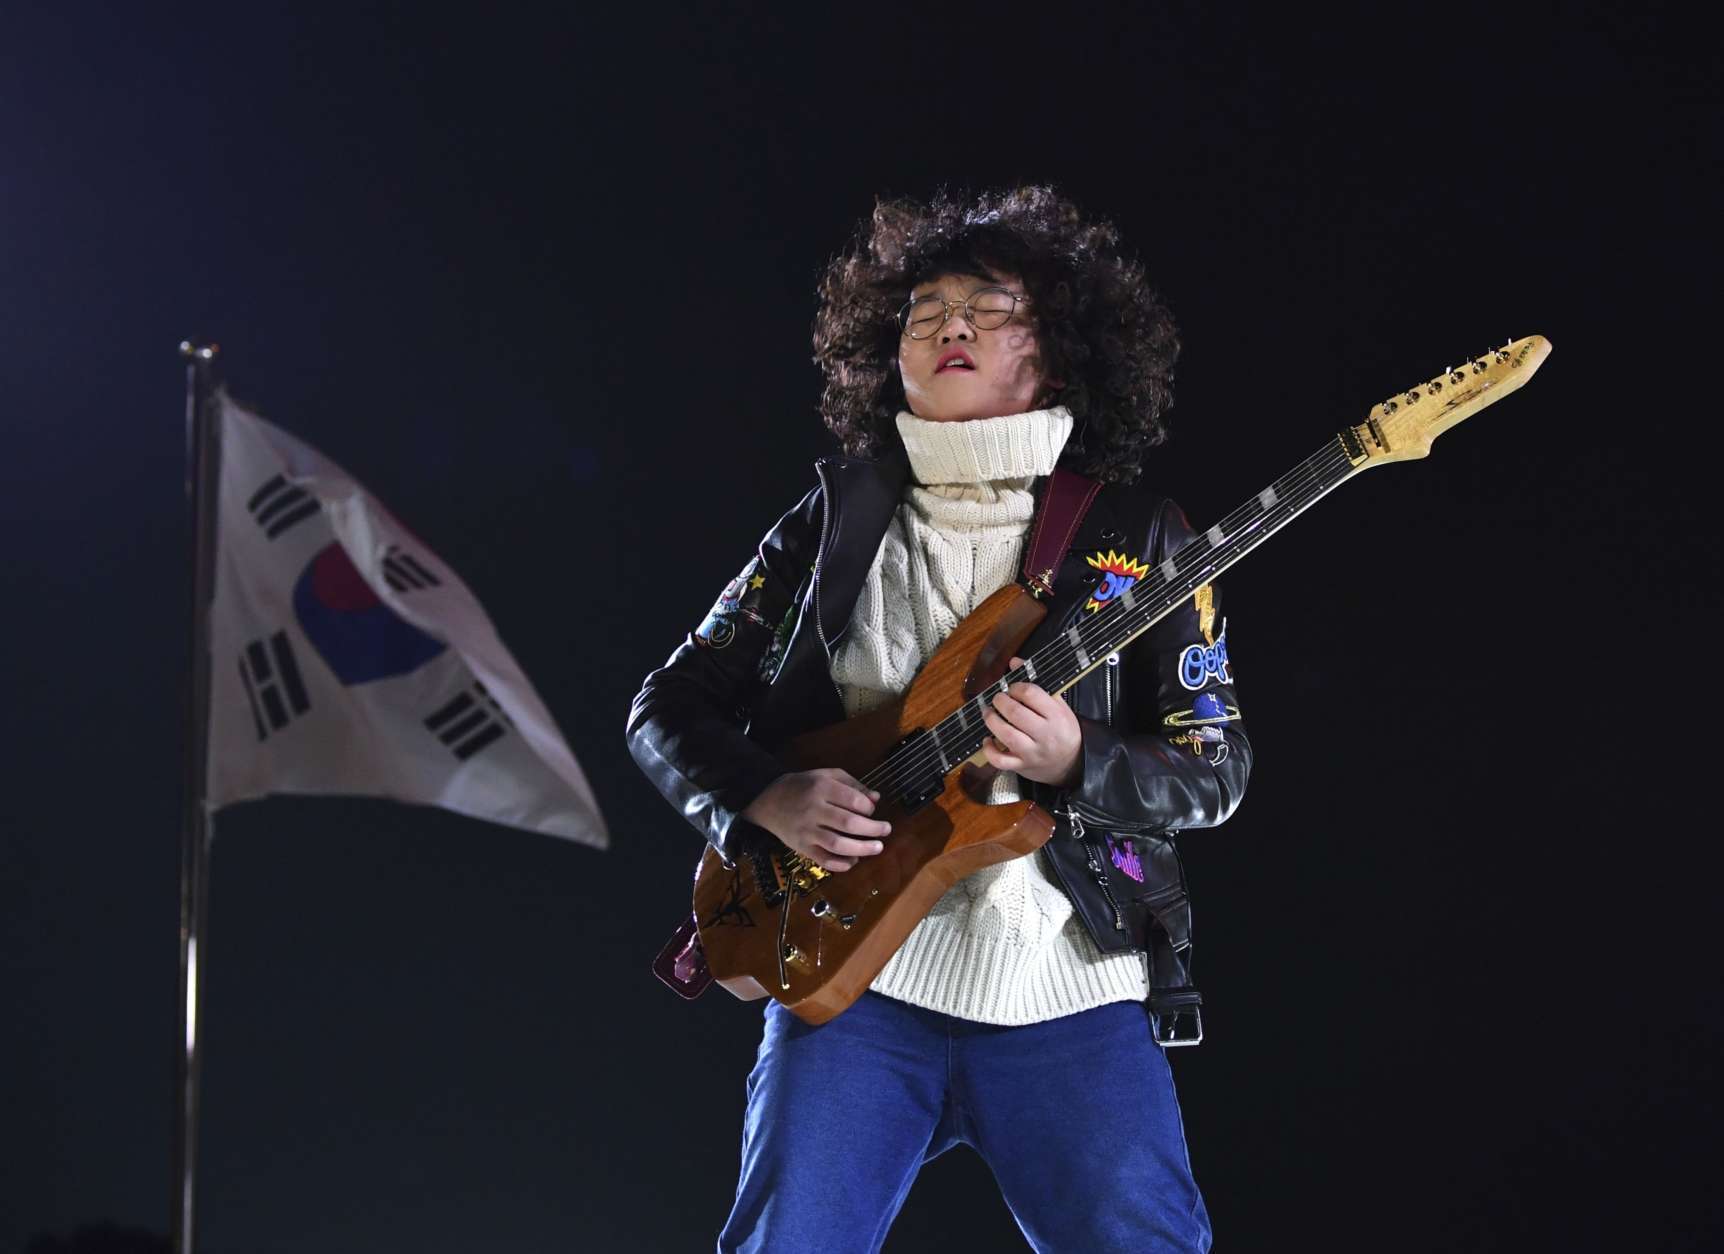 Thirteen-year-old guitarist Yang Tae-hwan plays a variation on 'Winter' from Vivaldi's The Four Seasons, during the closing ceremony of the 2018 Winter Olympics in Pyeongchang, South Korea, Sunday, Feb. 25, 2018. (Christof Stache/Pool Photo via AP)